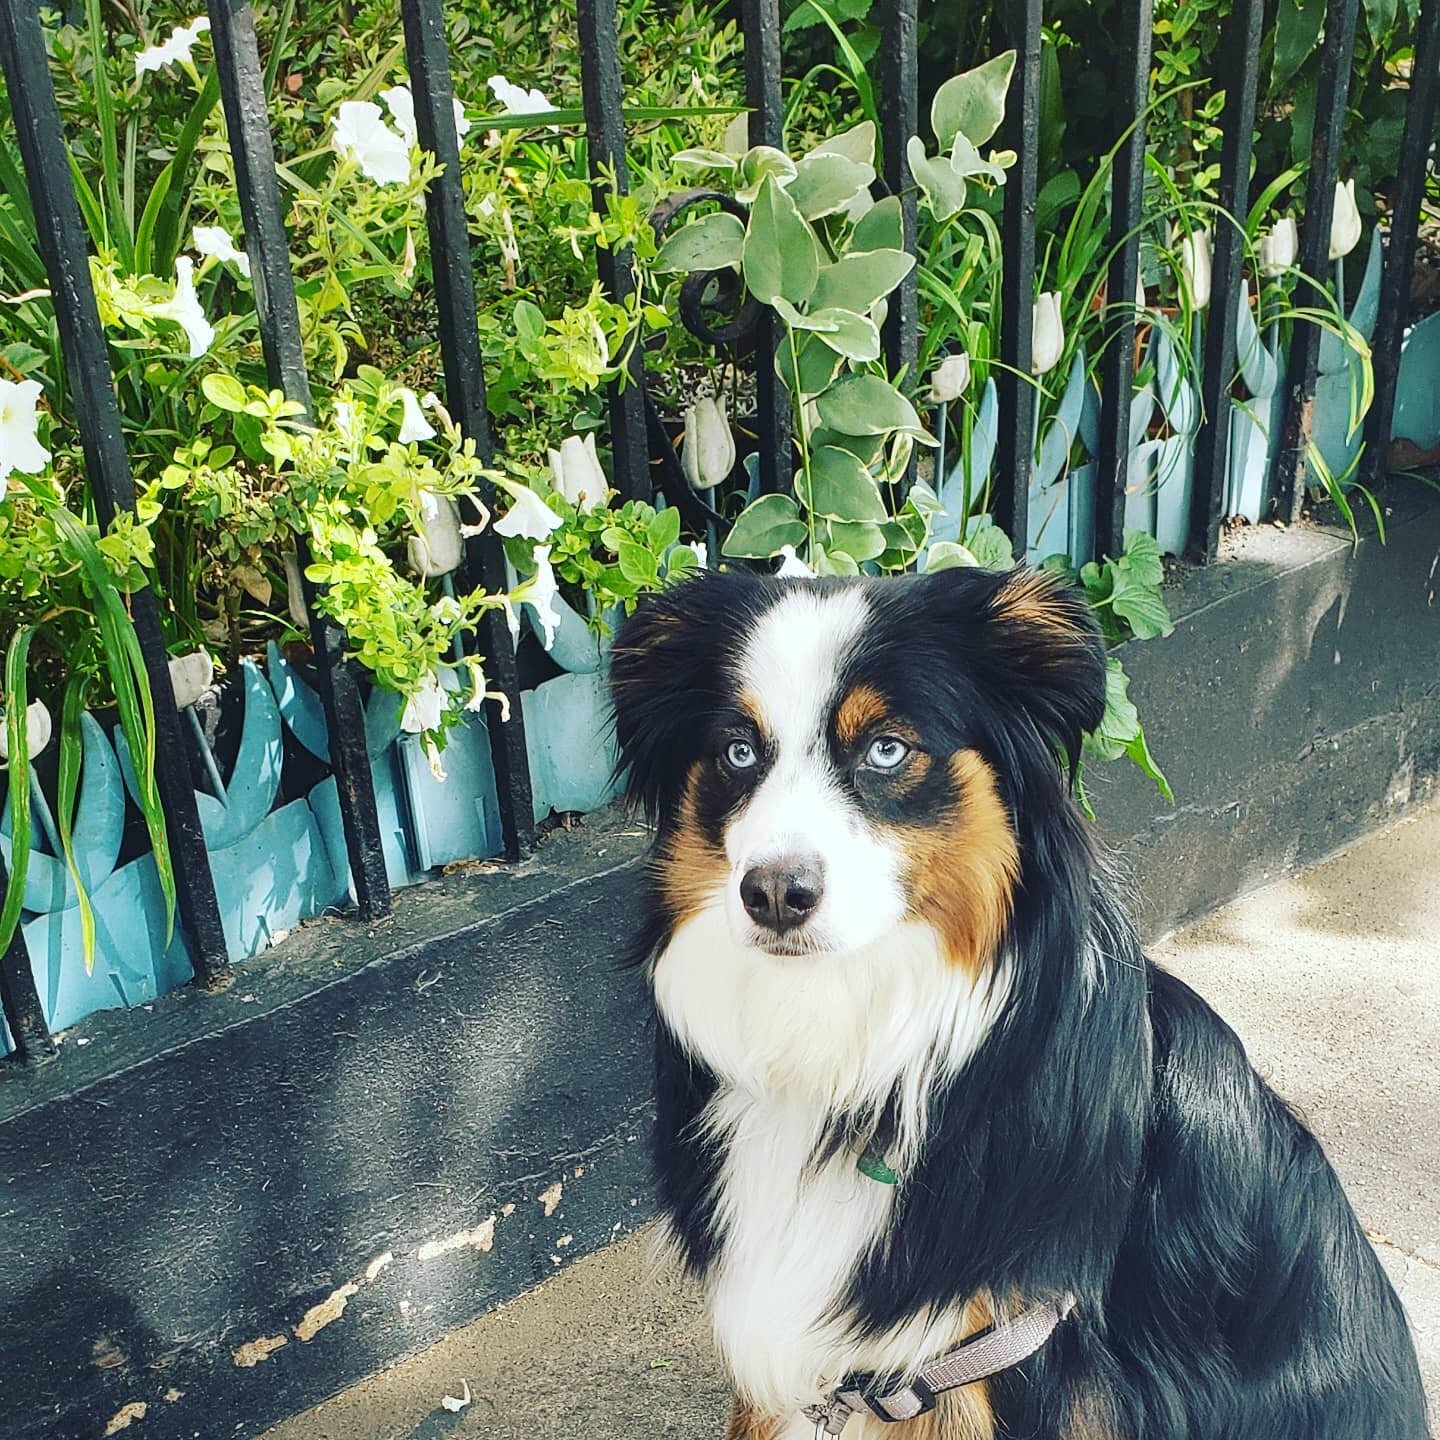 Benji pauses to consider his options for the weekend! 🐶🌿🌷❤
#responsiblewalkers #professionalpetcare
#downtownjc #lovethisdog @dogsofhamiltonparkjc #dogsofjerseycity #downtownjerseycity #jerseycity #jerseycitypets #jerseycitydogs #jcdogs #jc #jcdog